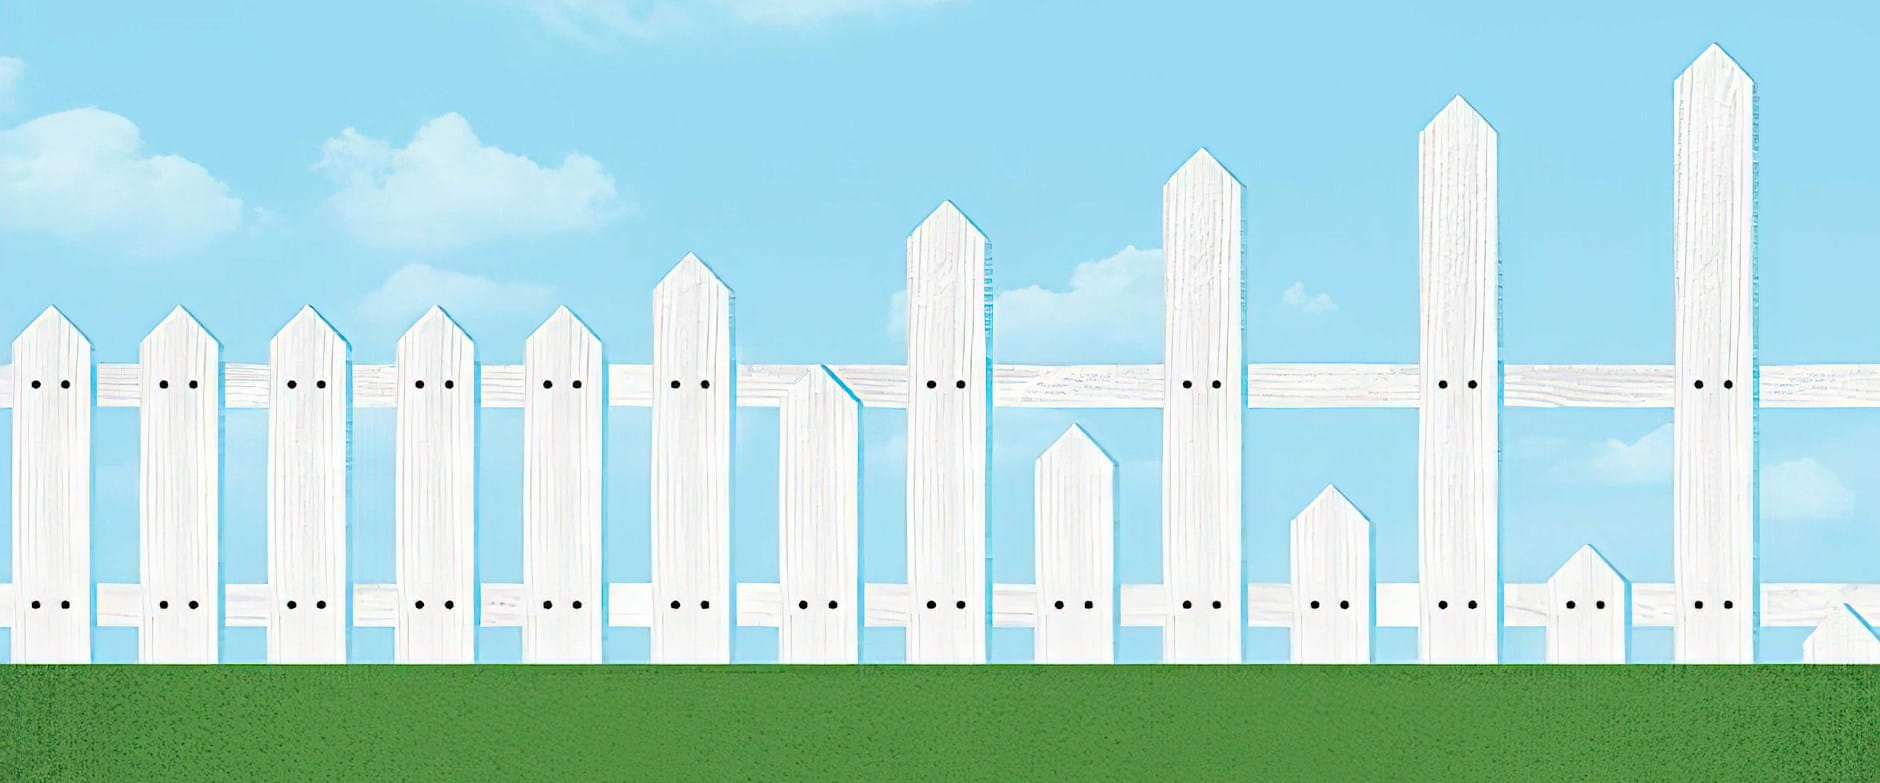 White picket fence with slats of different sizes at the end